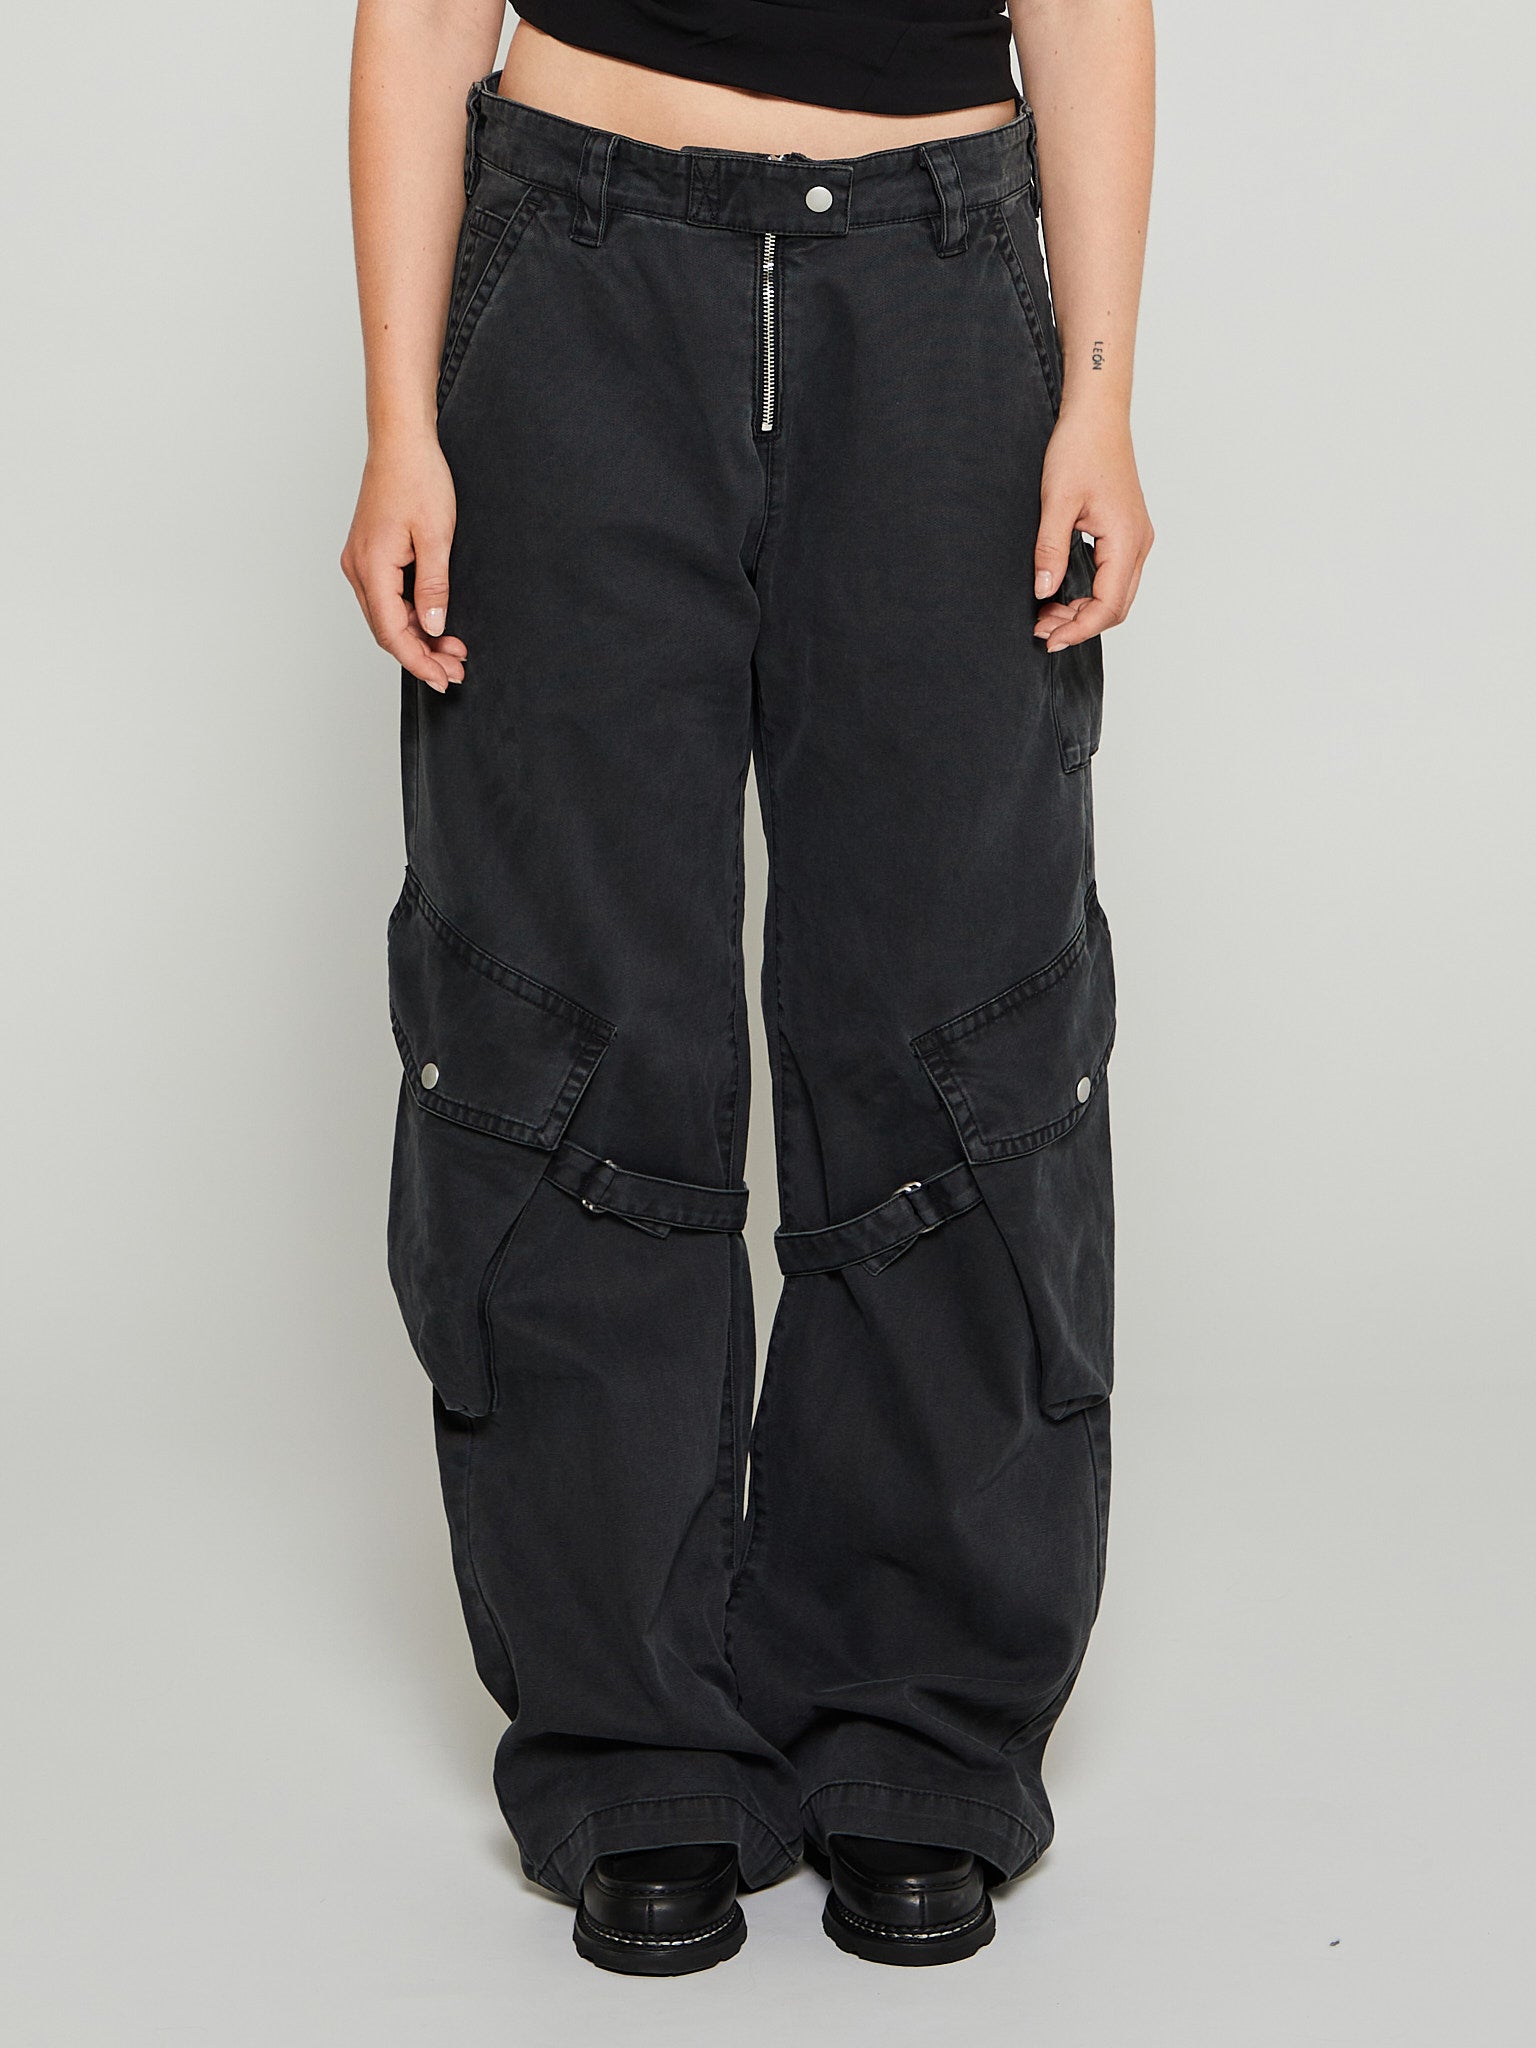 Acne Studios - Cargo Pants in Washed Black